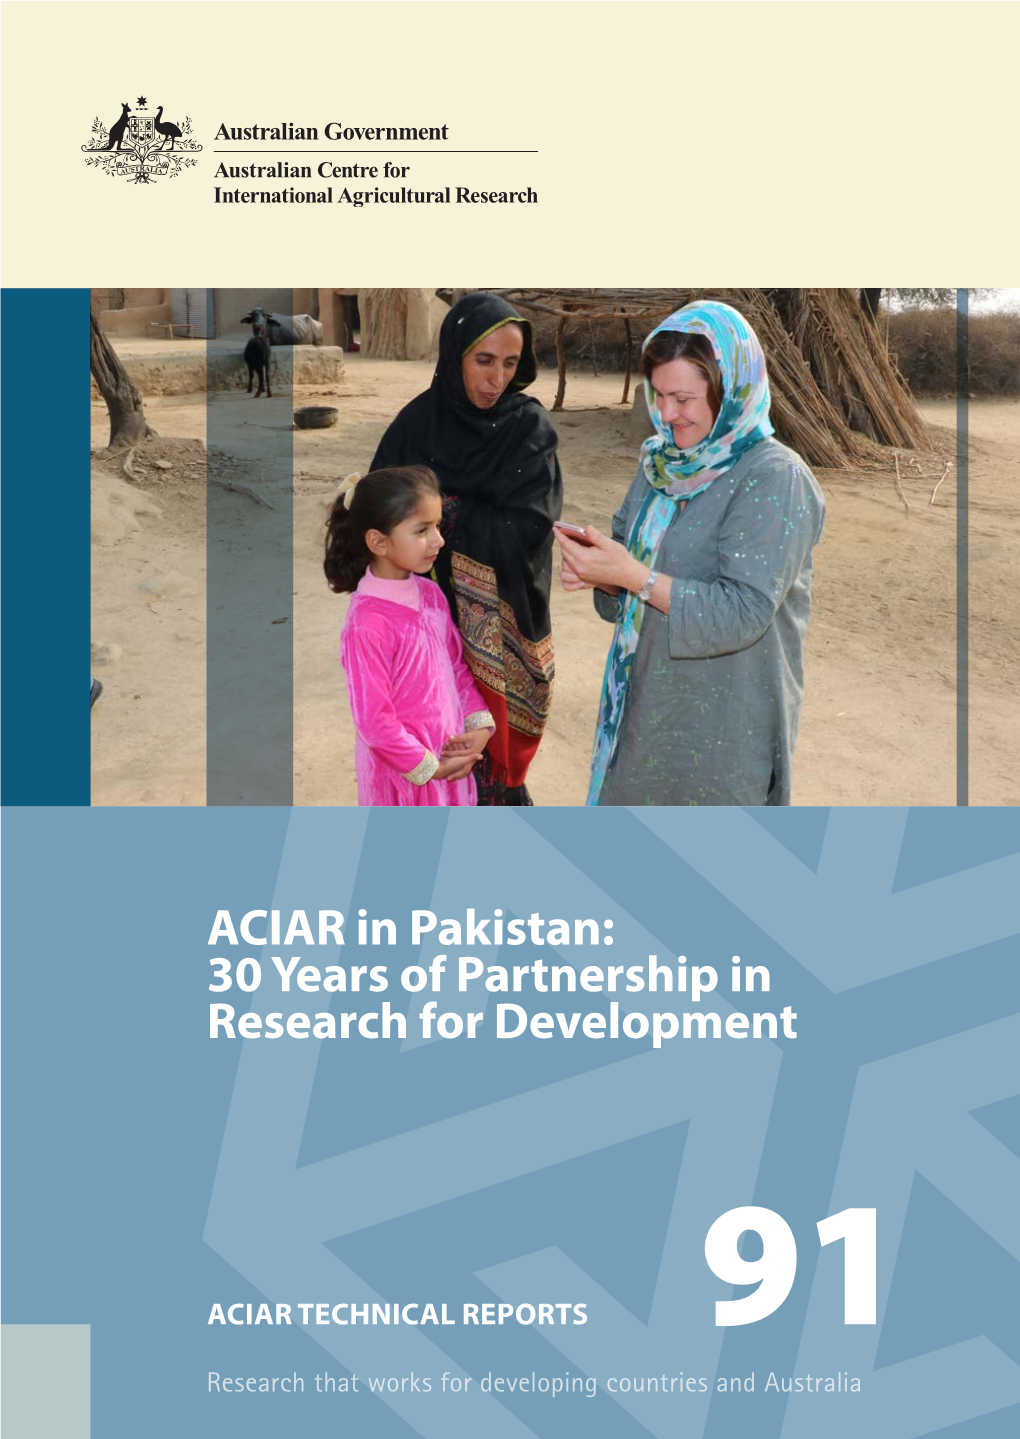 ACIAR in Pakistan: 30 Years of Partnership in Research for Development